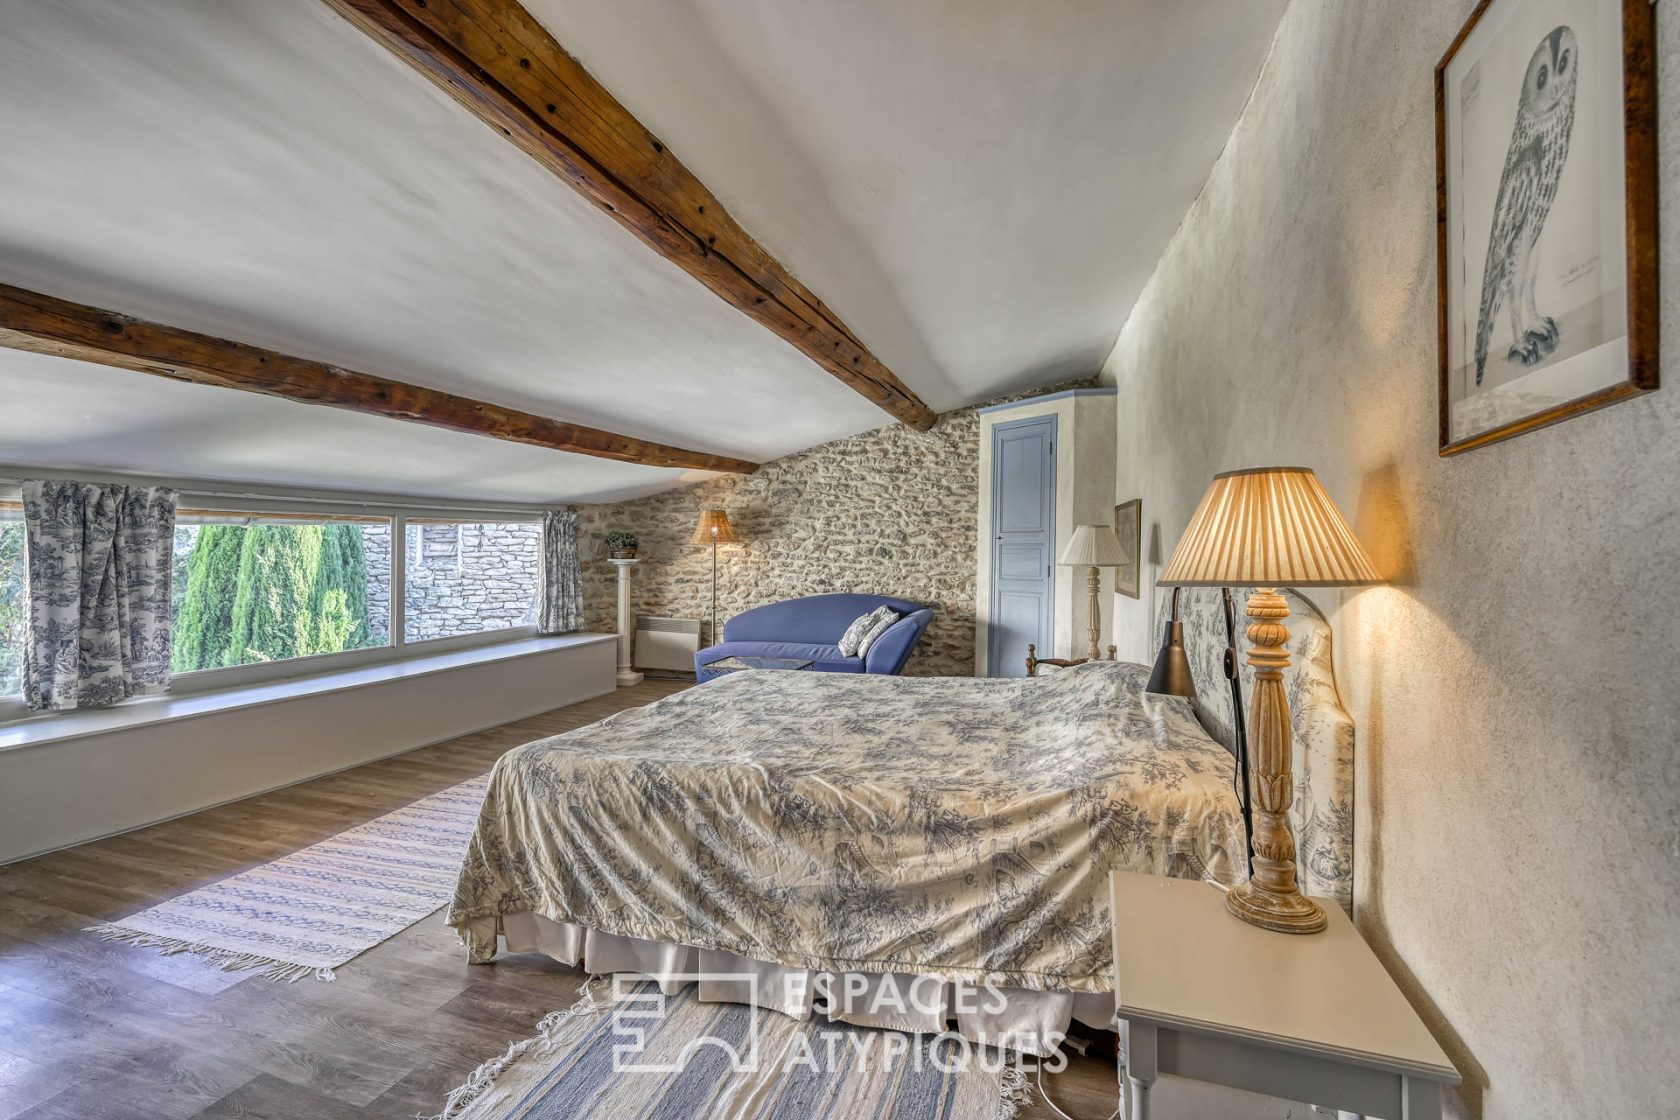 17th century bourgeois farmhouse with garden in the heart of the historic center